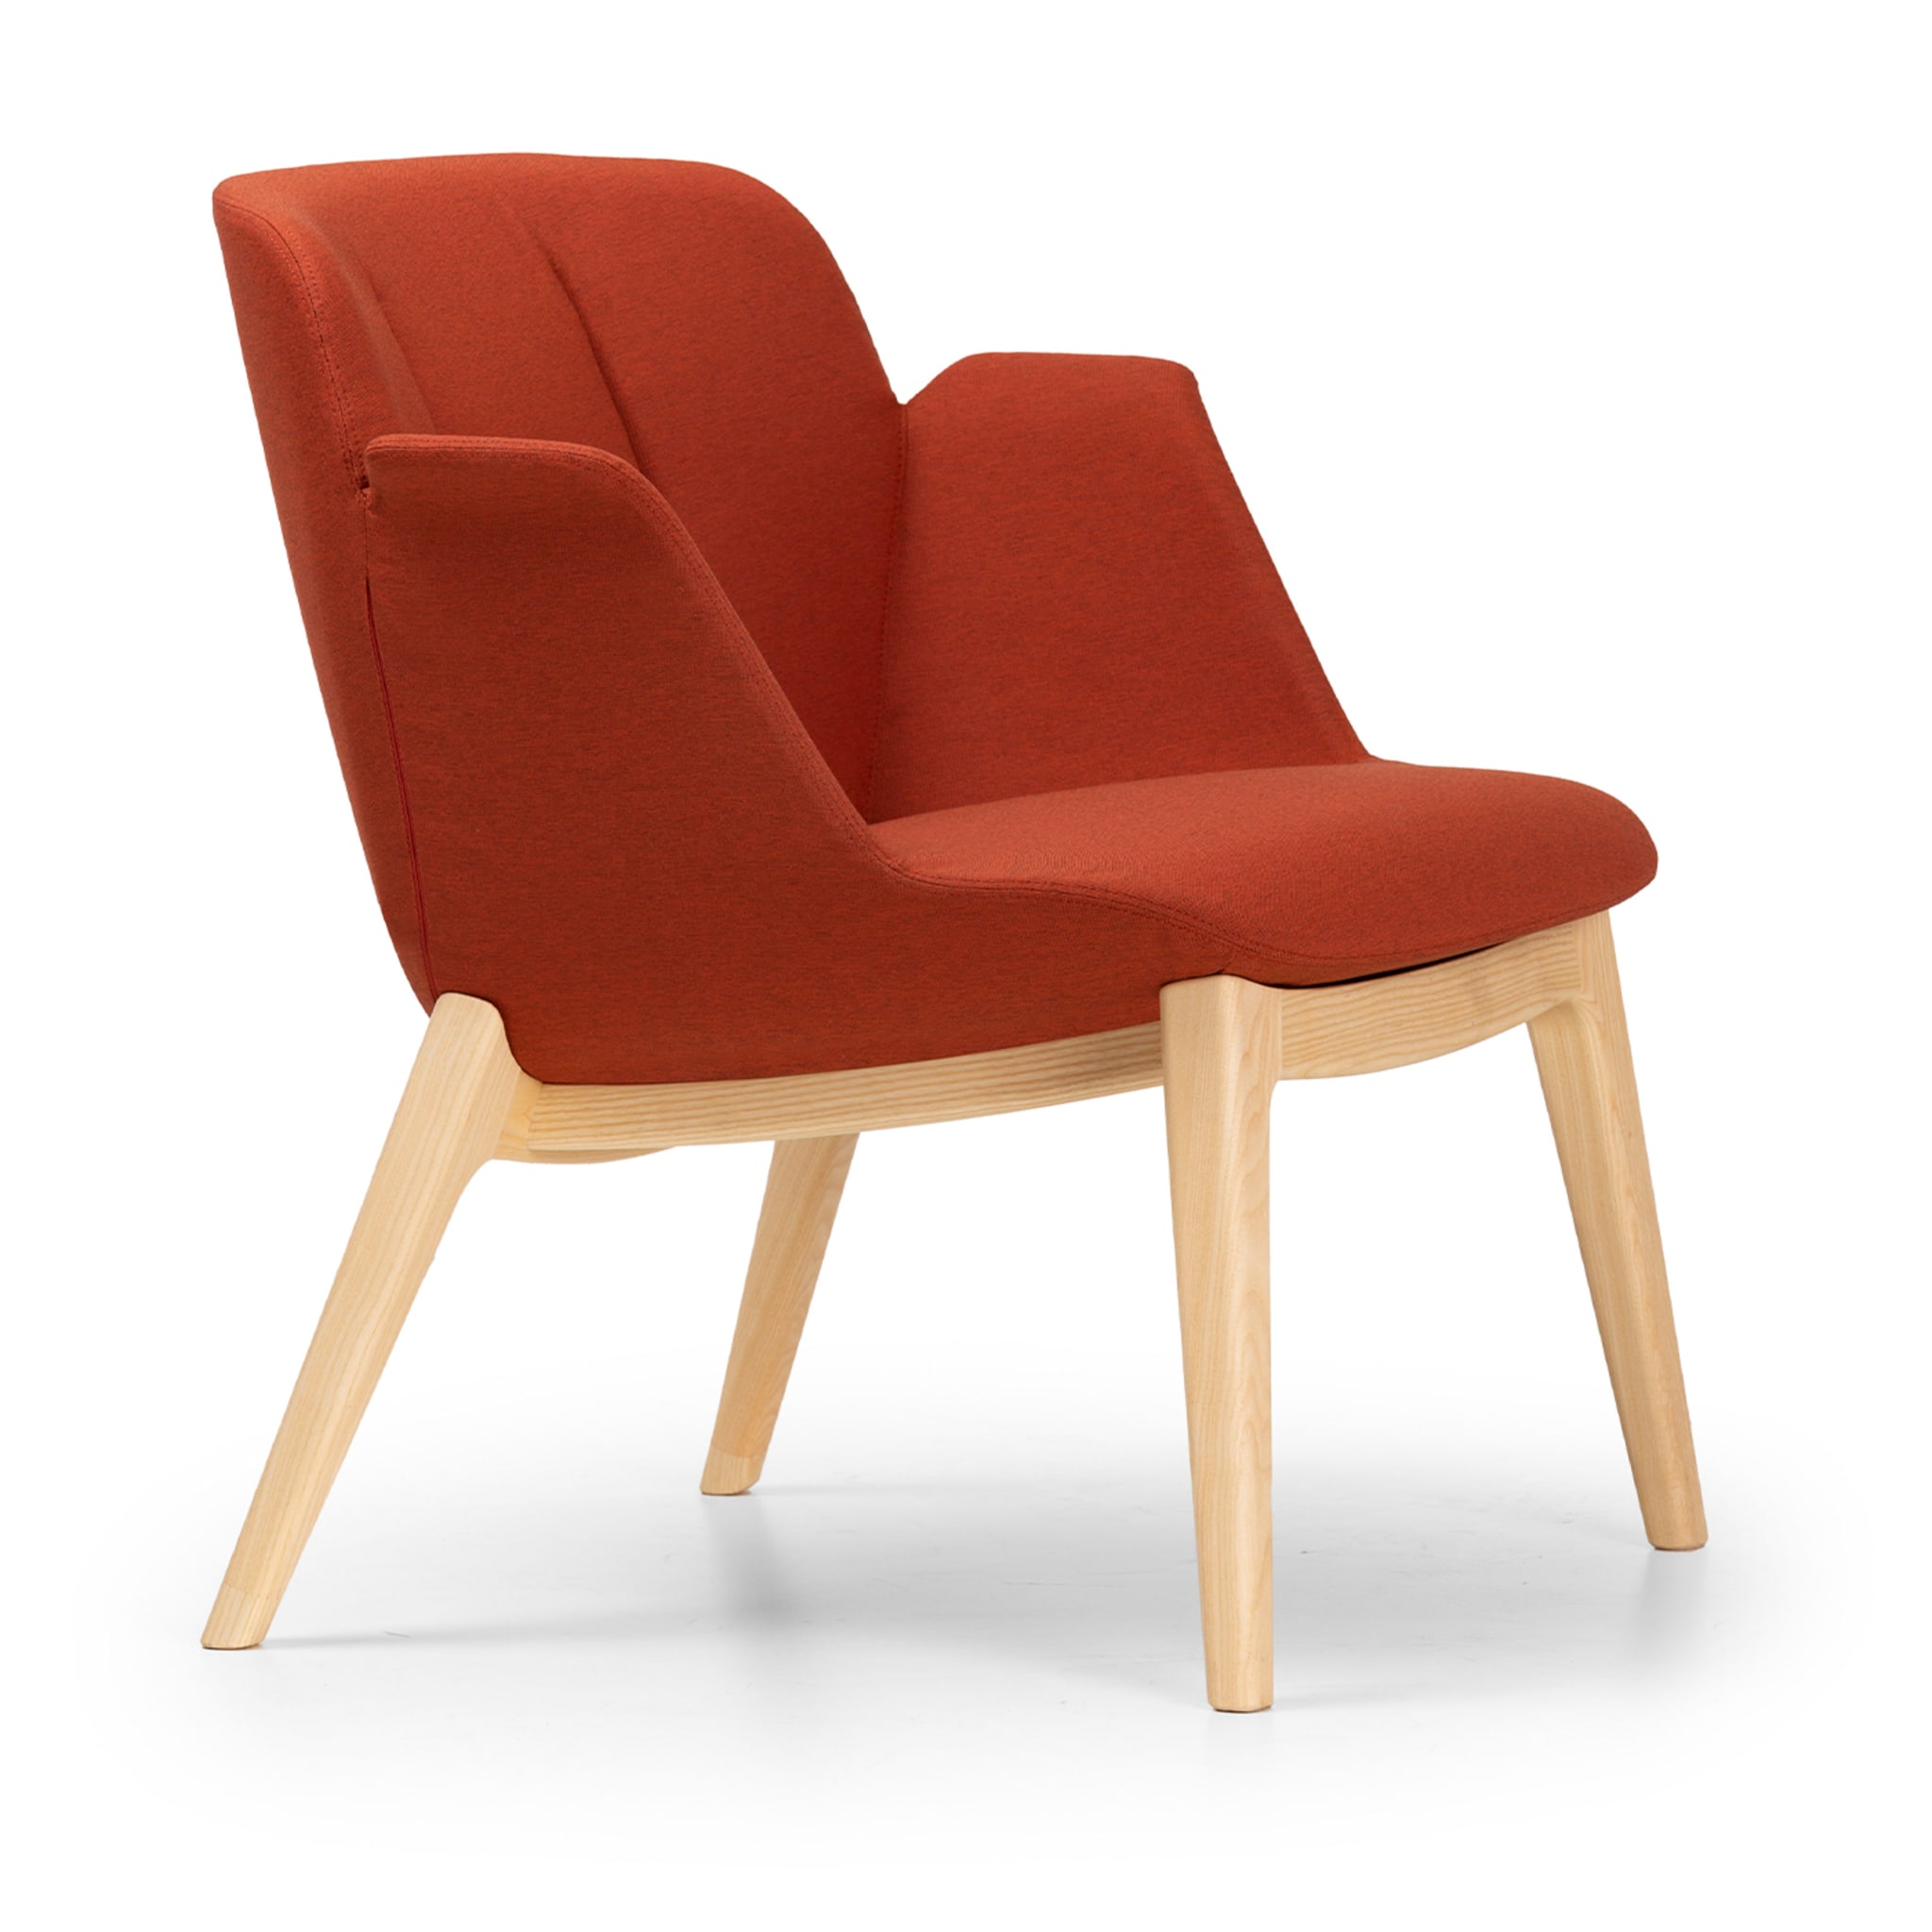 Hive Red Armchair by camira - Alternative view 1